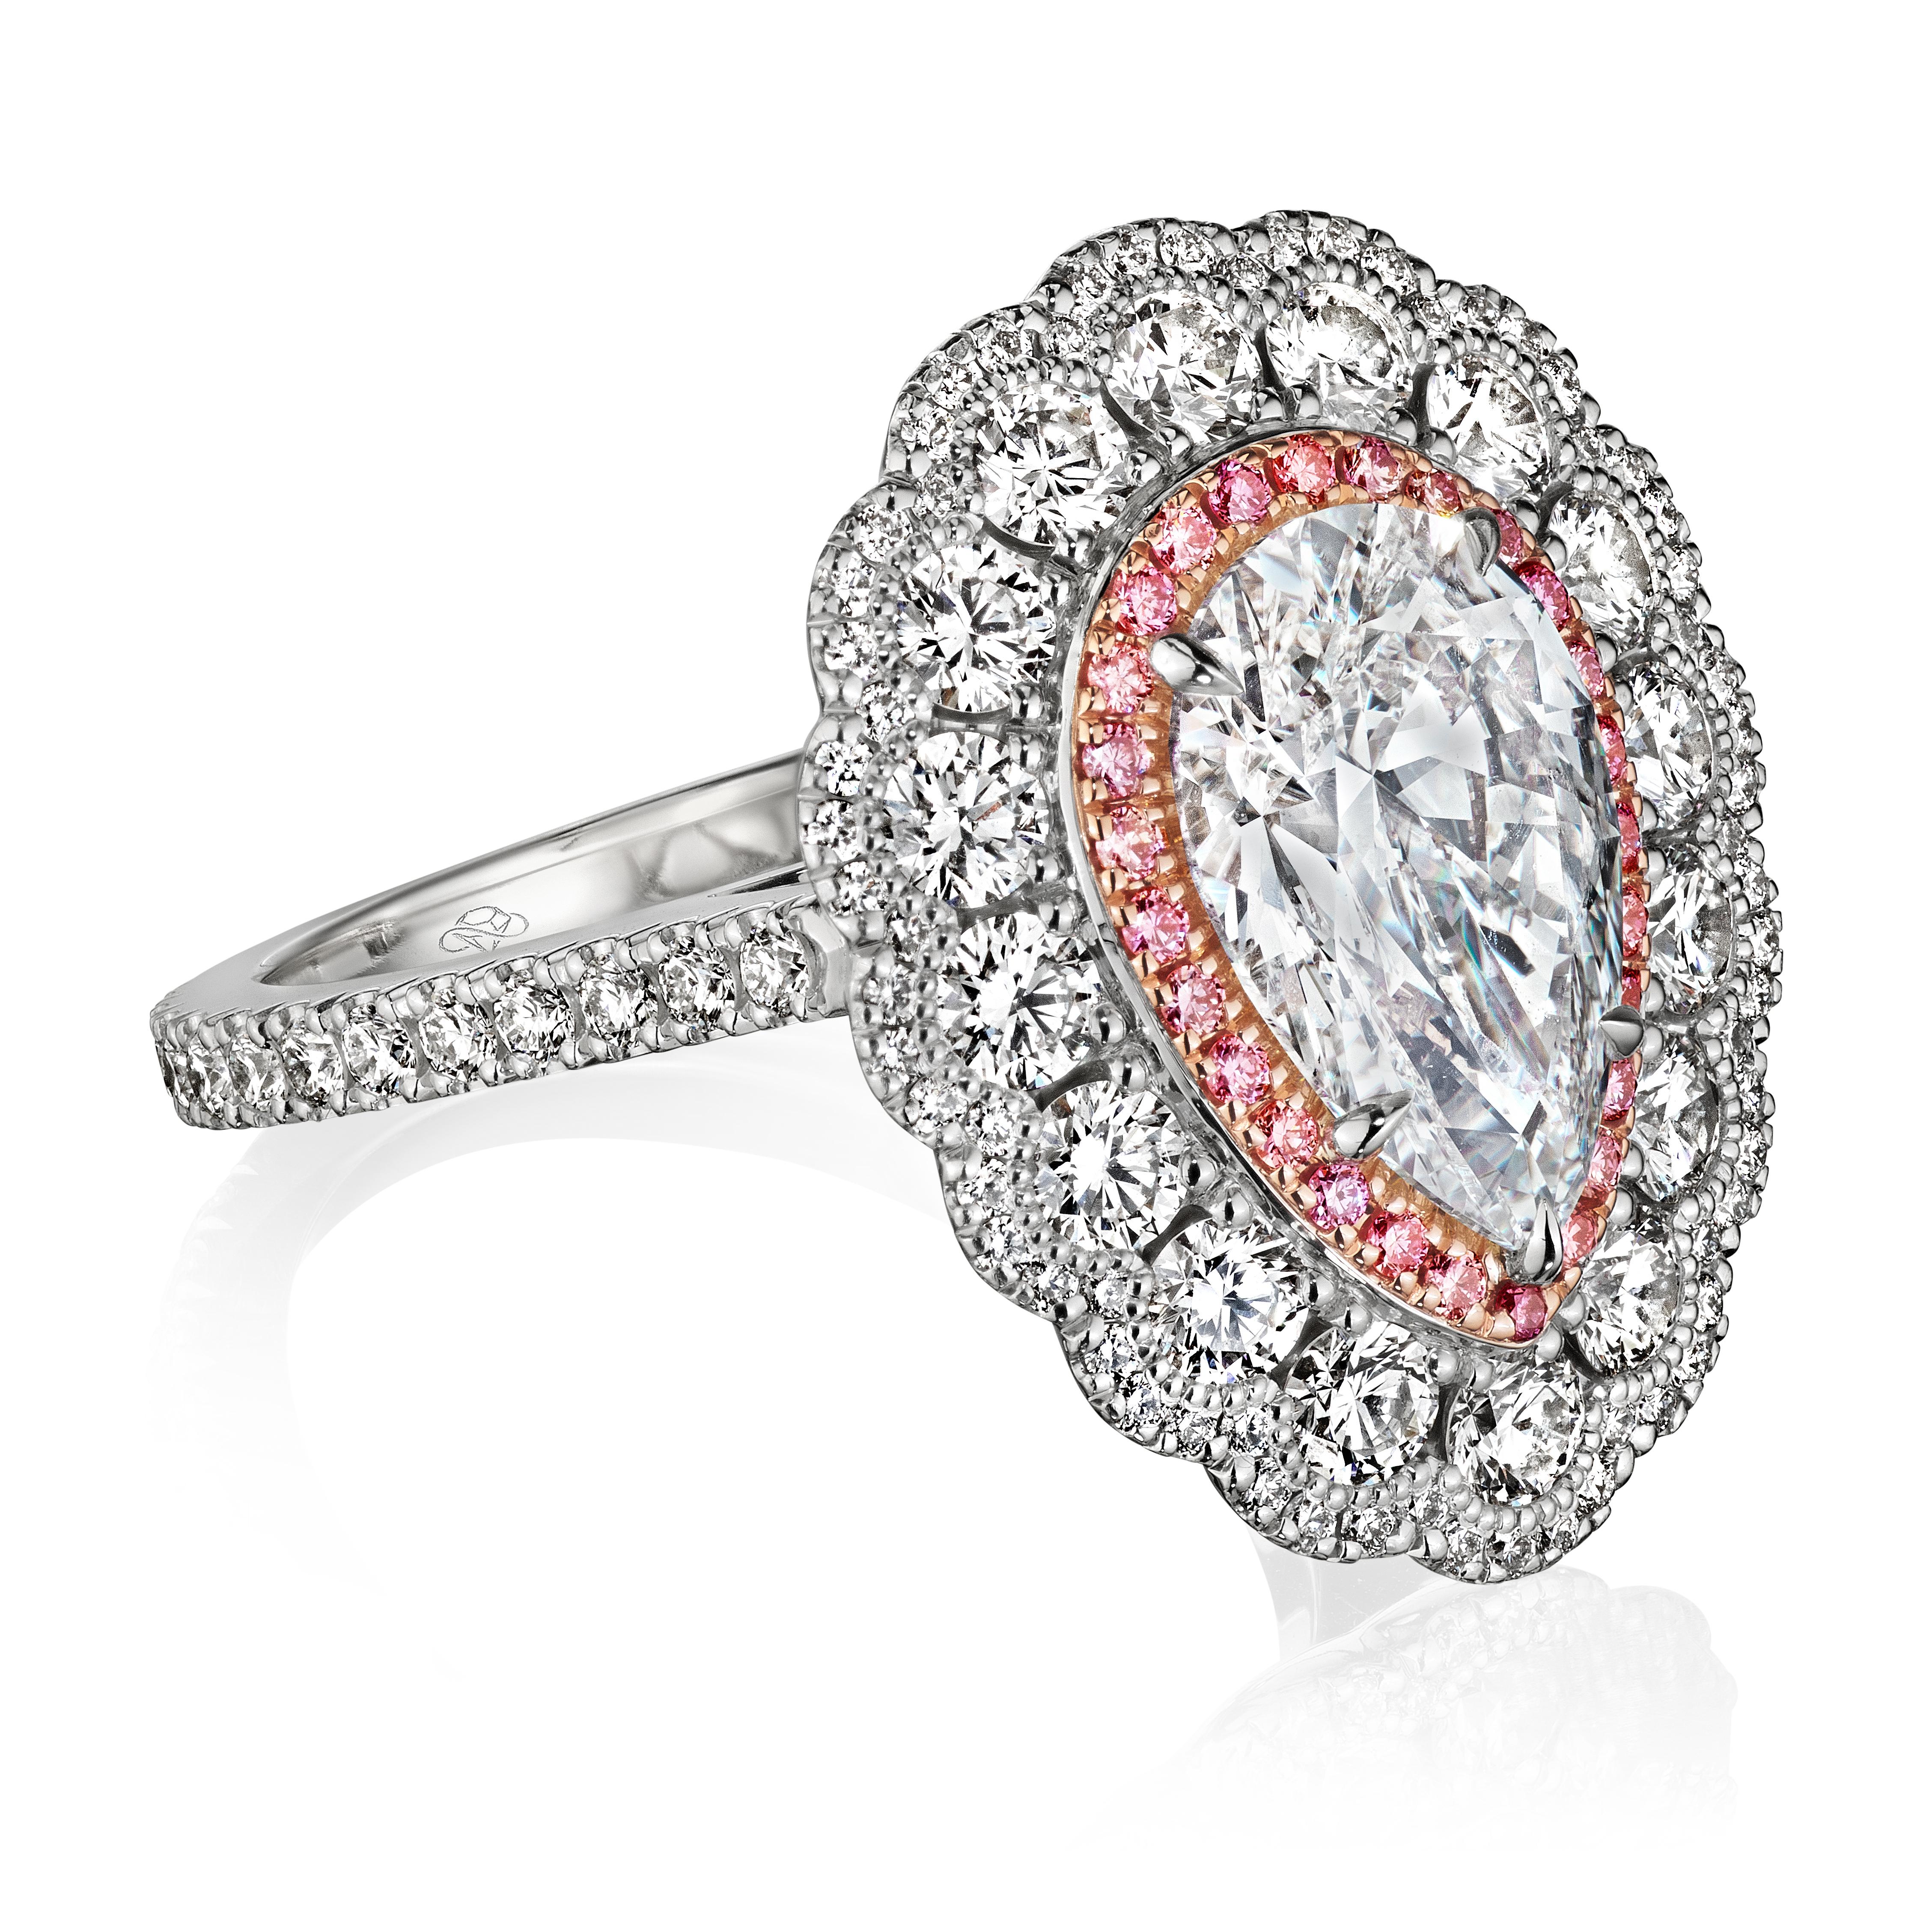 The eye-catching scalloped edges and addition of pink diamonds make The Elena stand out from the crowd. The stunning triple halo of this cathedral setting provides additional finger coverage in comparison to single halos, giving it both a vintage